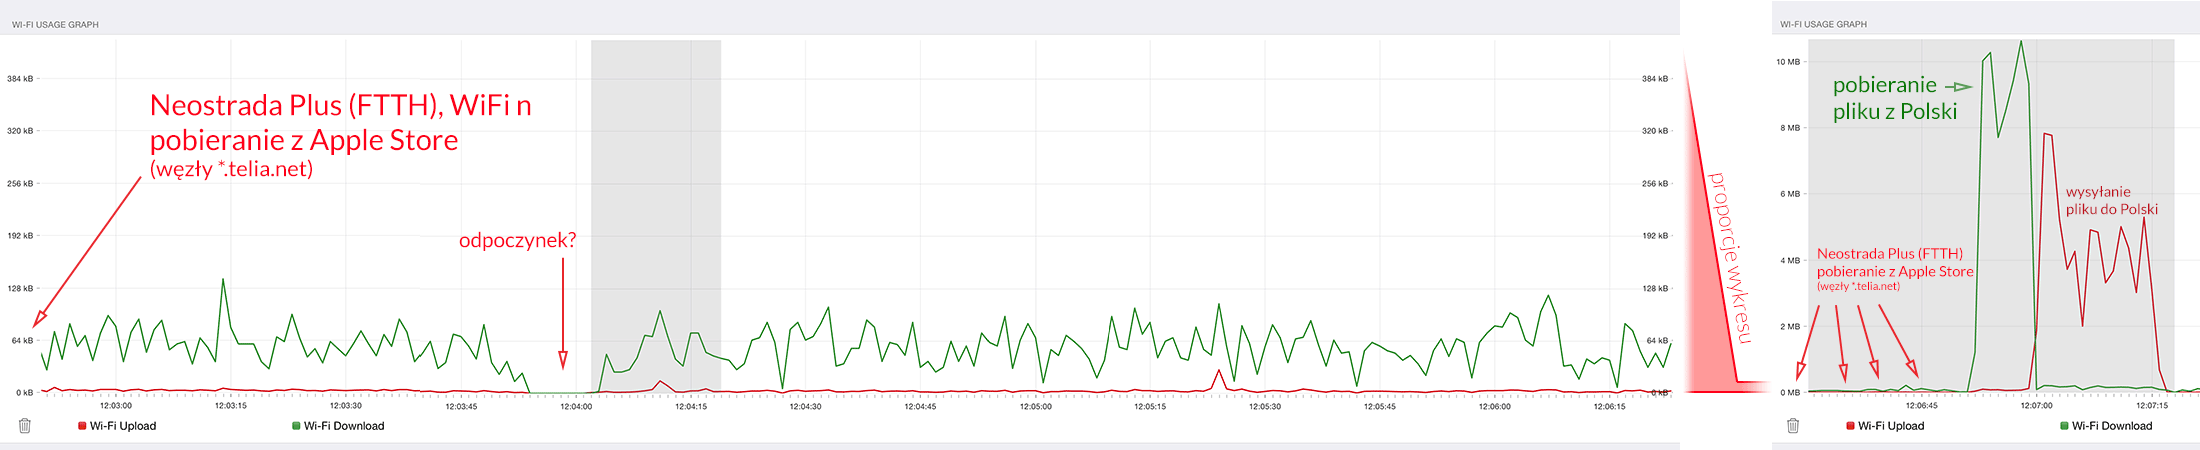 neoplus-appstore-wifi-graph.png